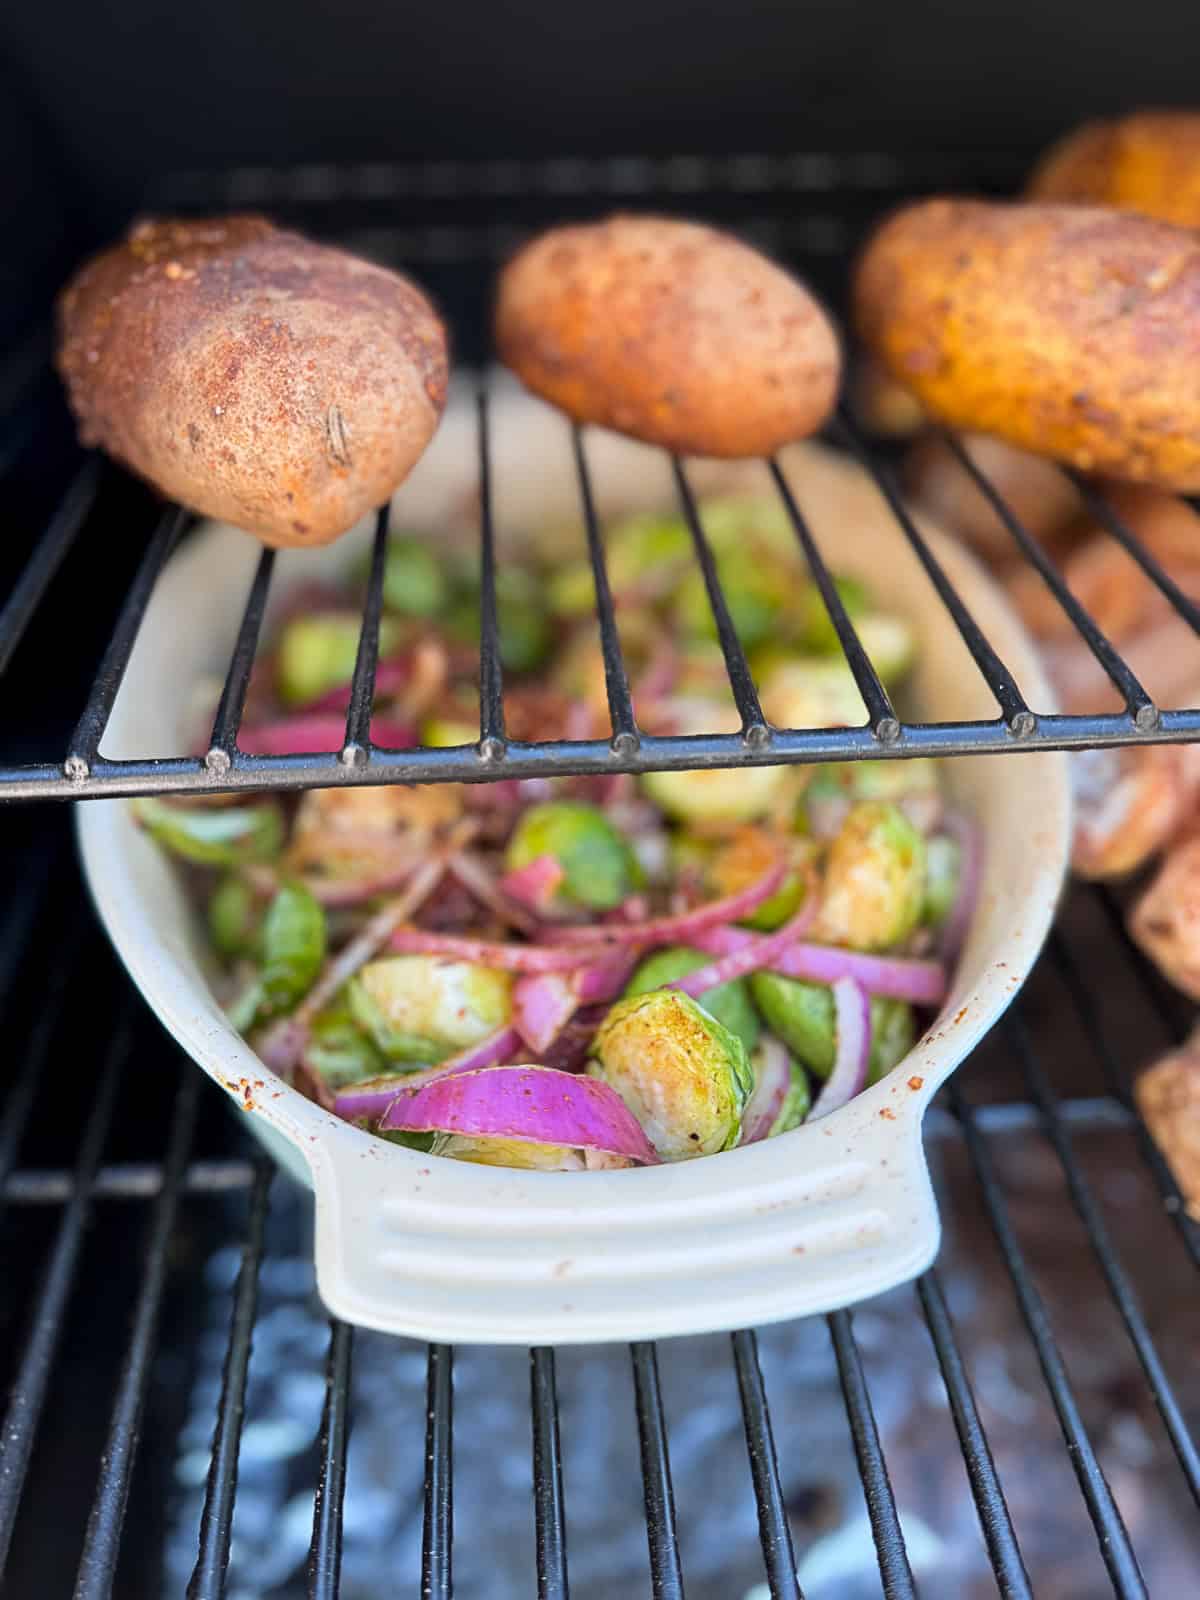 Baked Potatoes and Brussels Sprouts Smoking with Traeger Maple Pellets